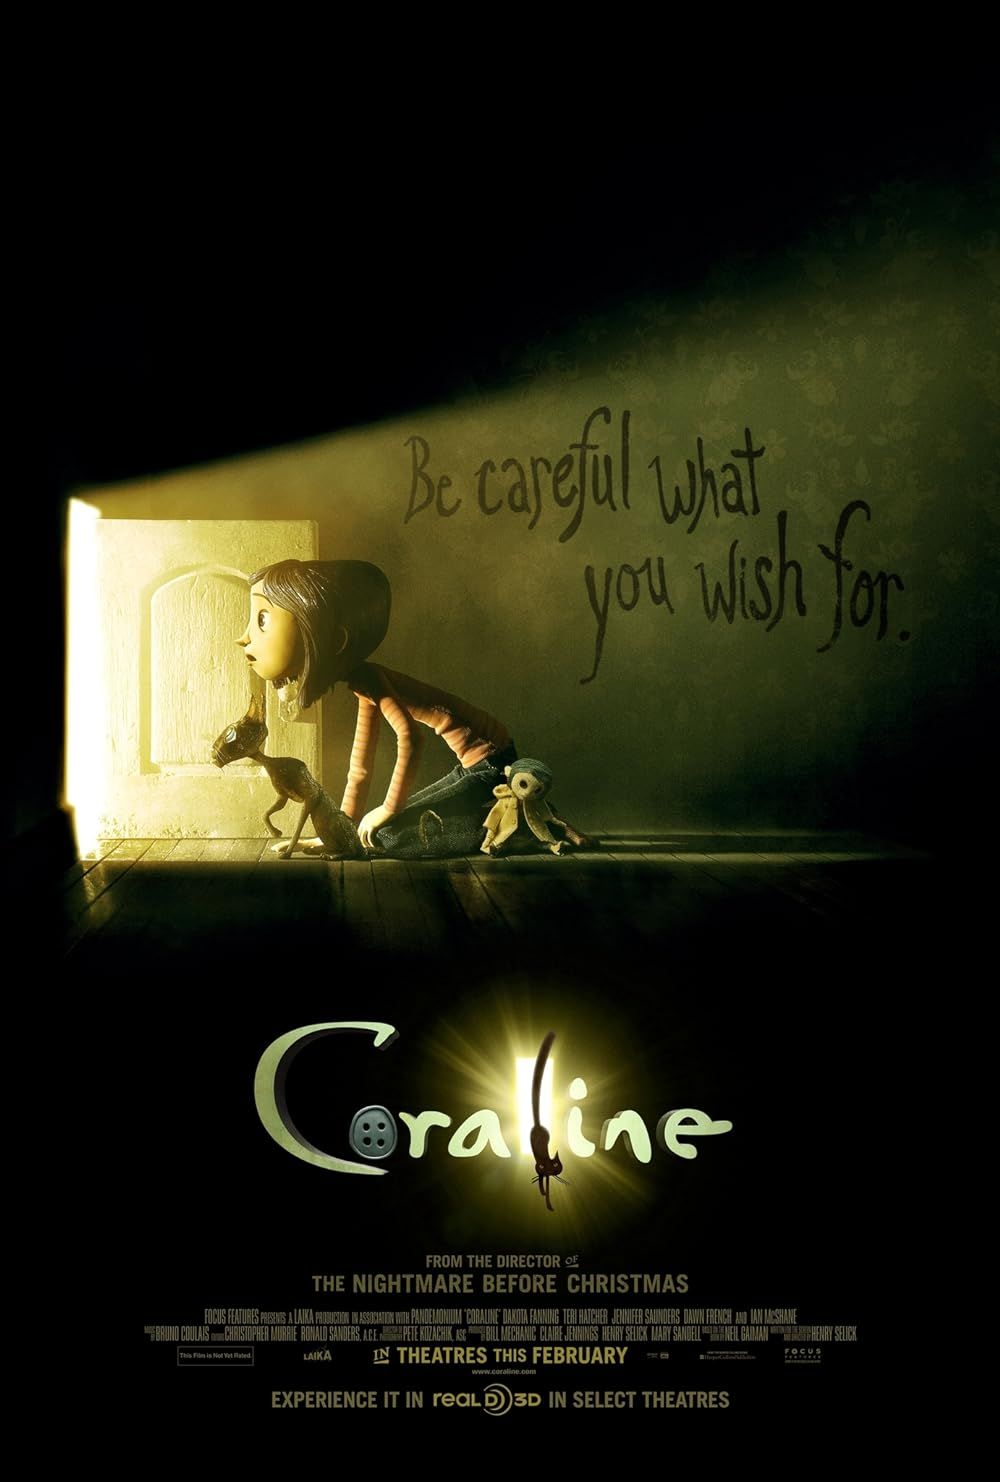 Coraline approaches a small open door in the official movie poster